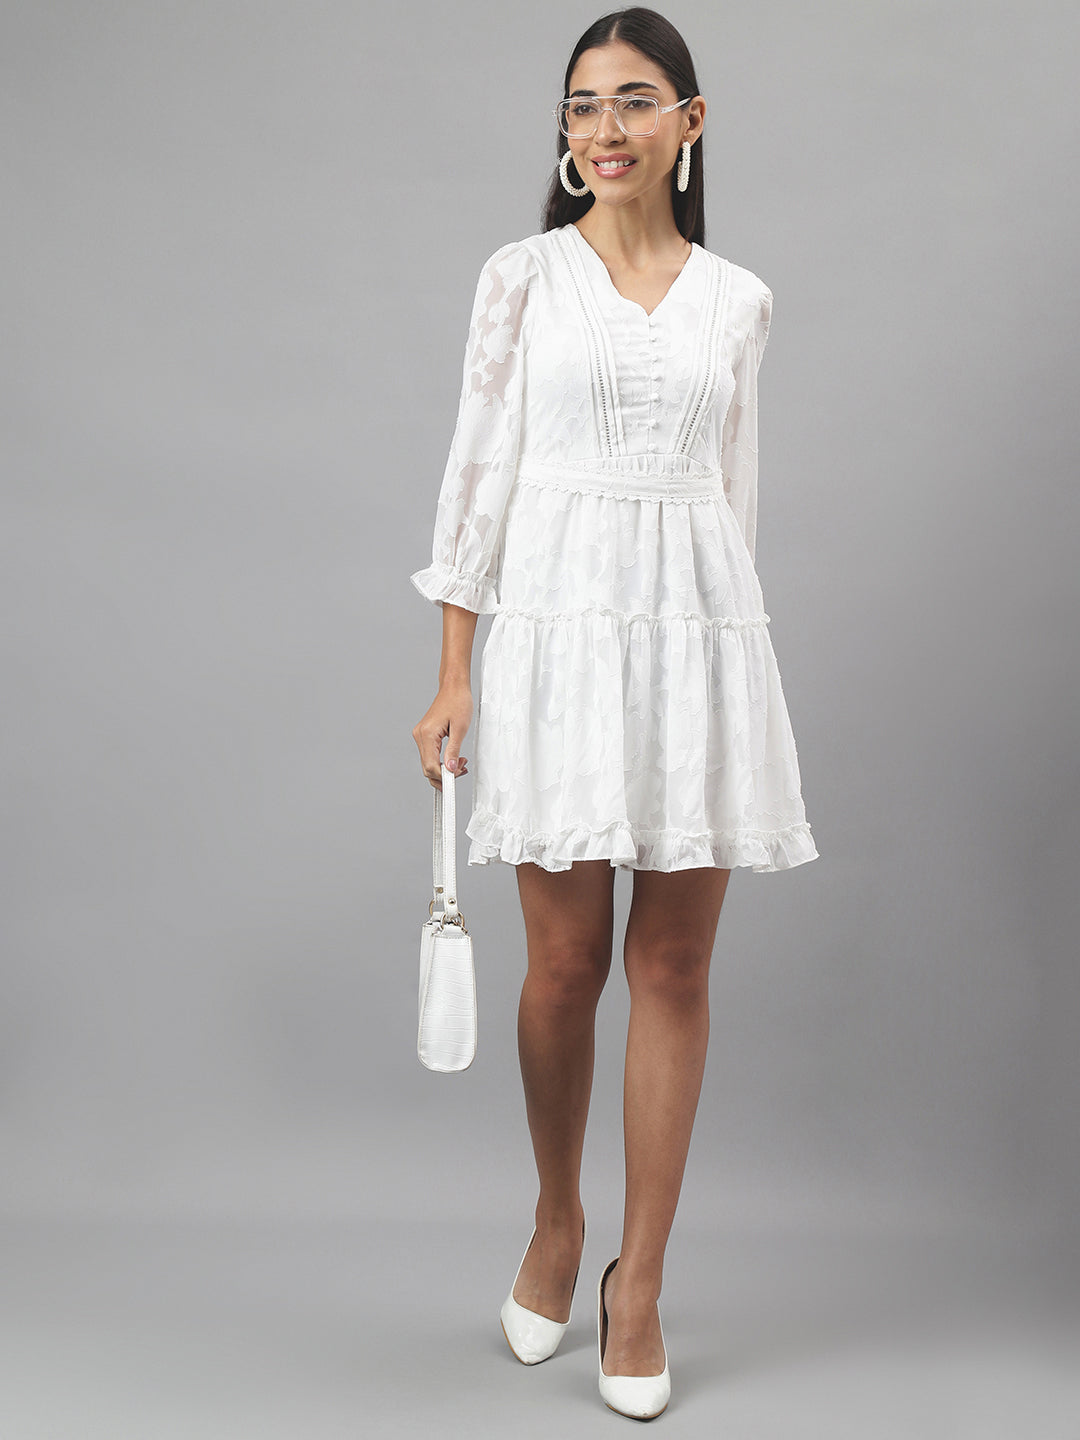 White Three-Quarter Sleeves V-Neck Solid Mini Dress For Casual Wear